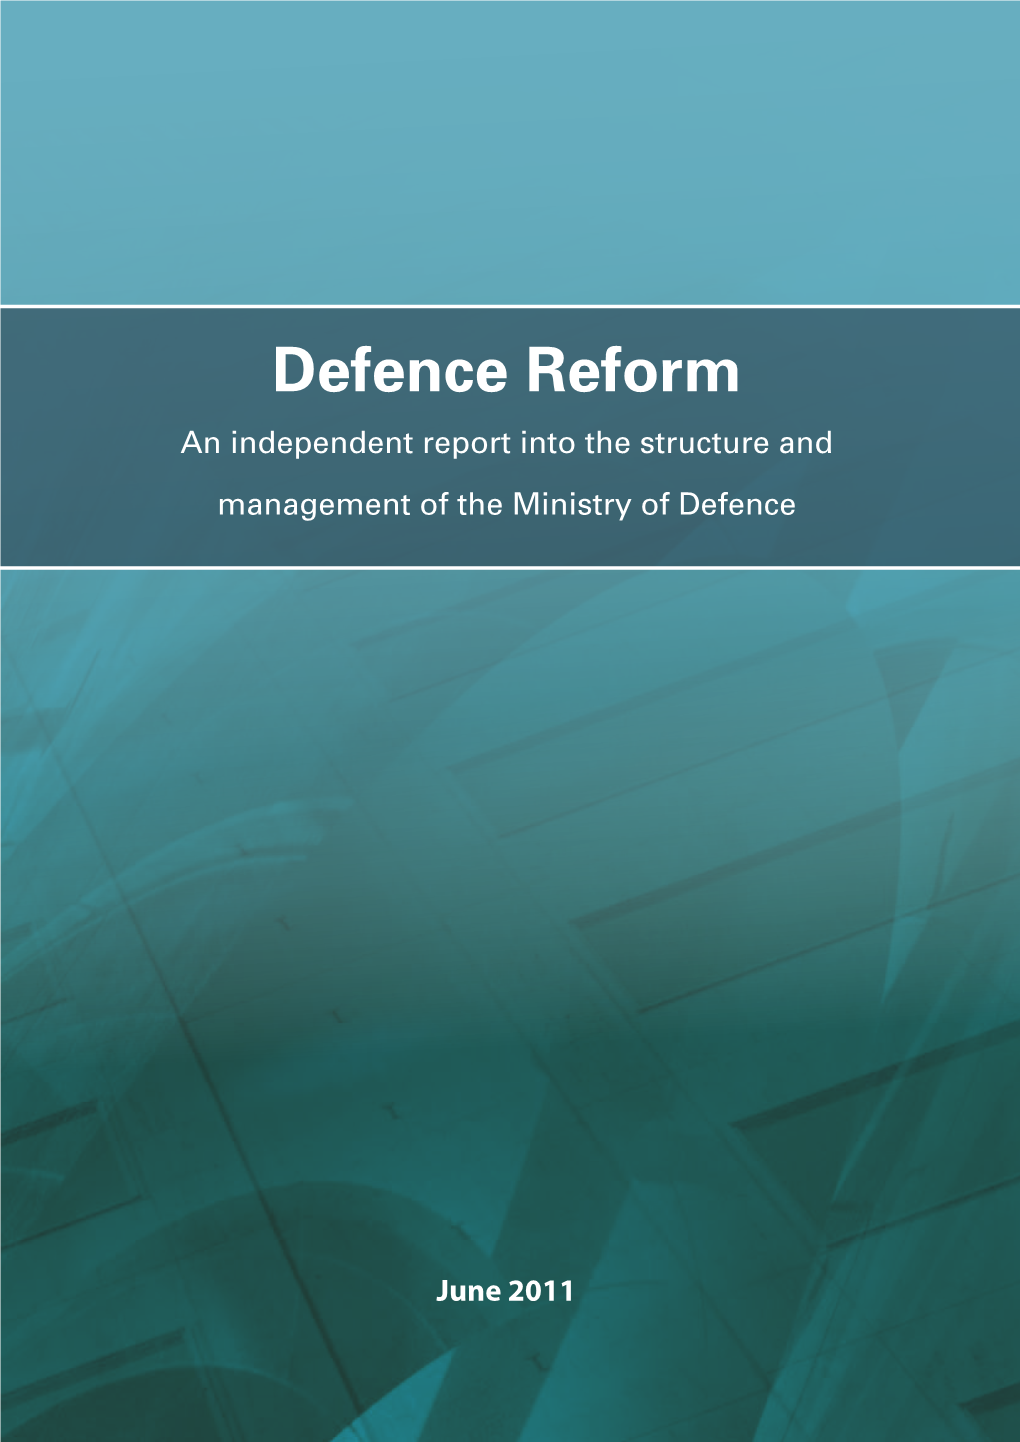 Defence Reform an Independent Report Into the Structure and Management of the Ministry of Defence